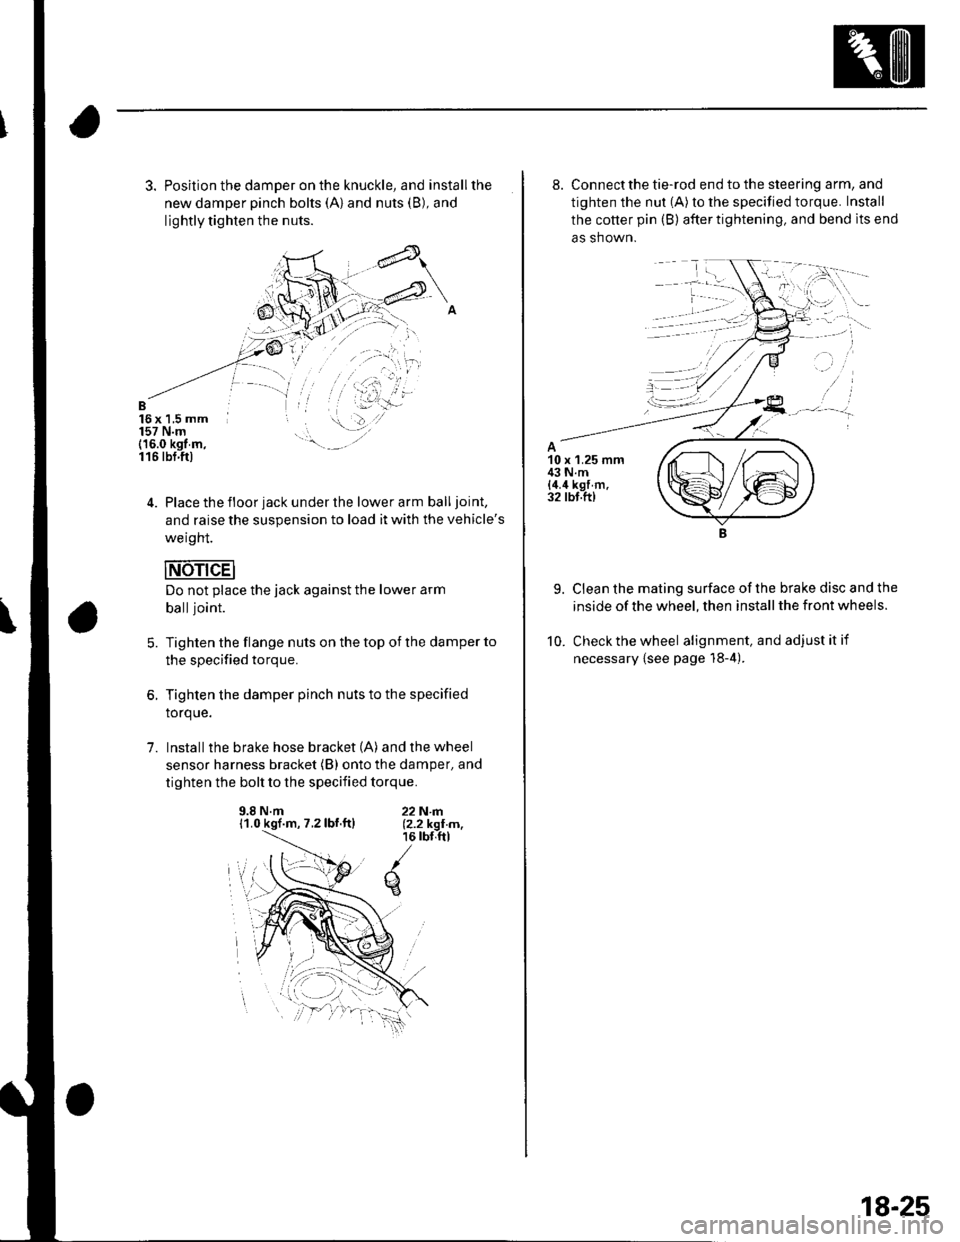 HONDA CIVIC 2003 7.G User Guide 3. Position the damper on the knuckle, and installthe
new damper pinch bolts (A) and nuts (B), and
lightly tighten the nuts.
B16x 1,5 mm157 N.m(16.0 kgt m,116 tbt.ftl
4. Place the floor jack under the